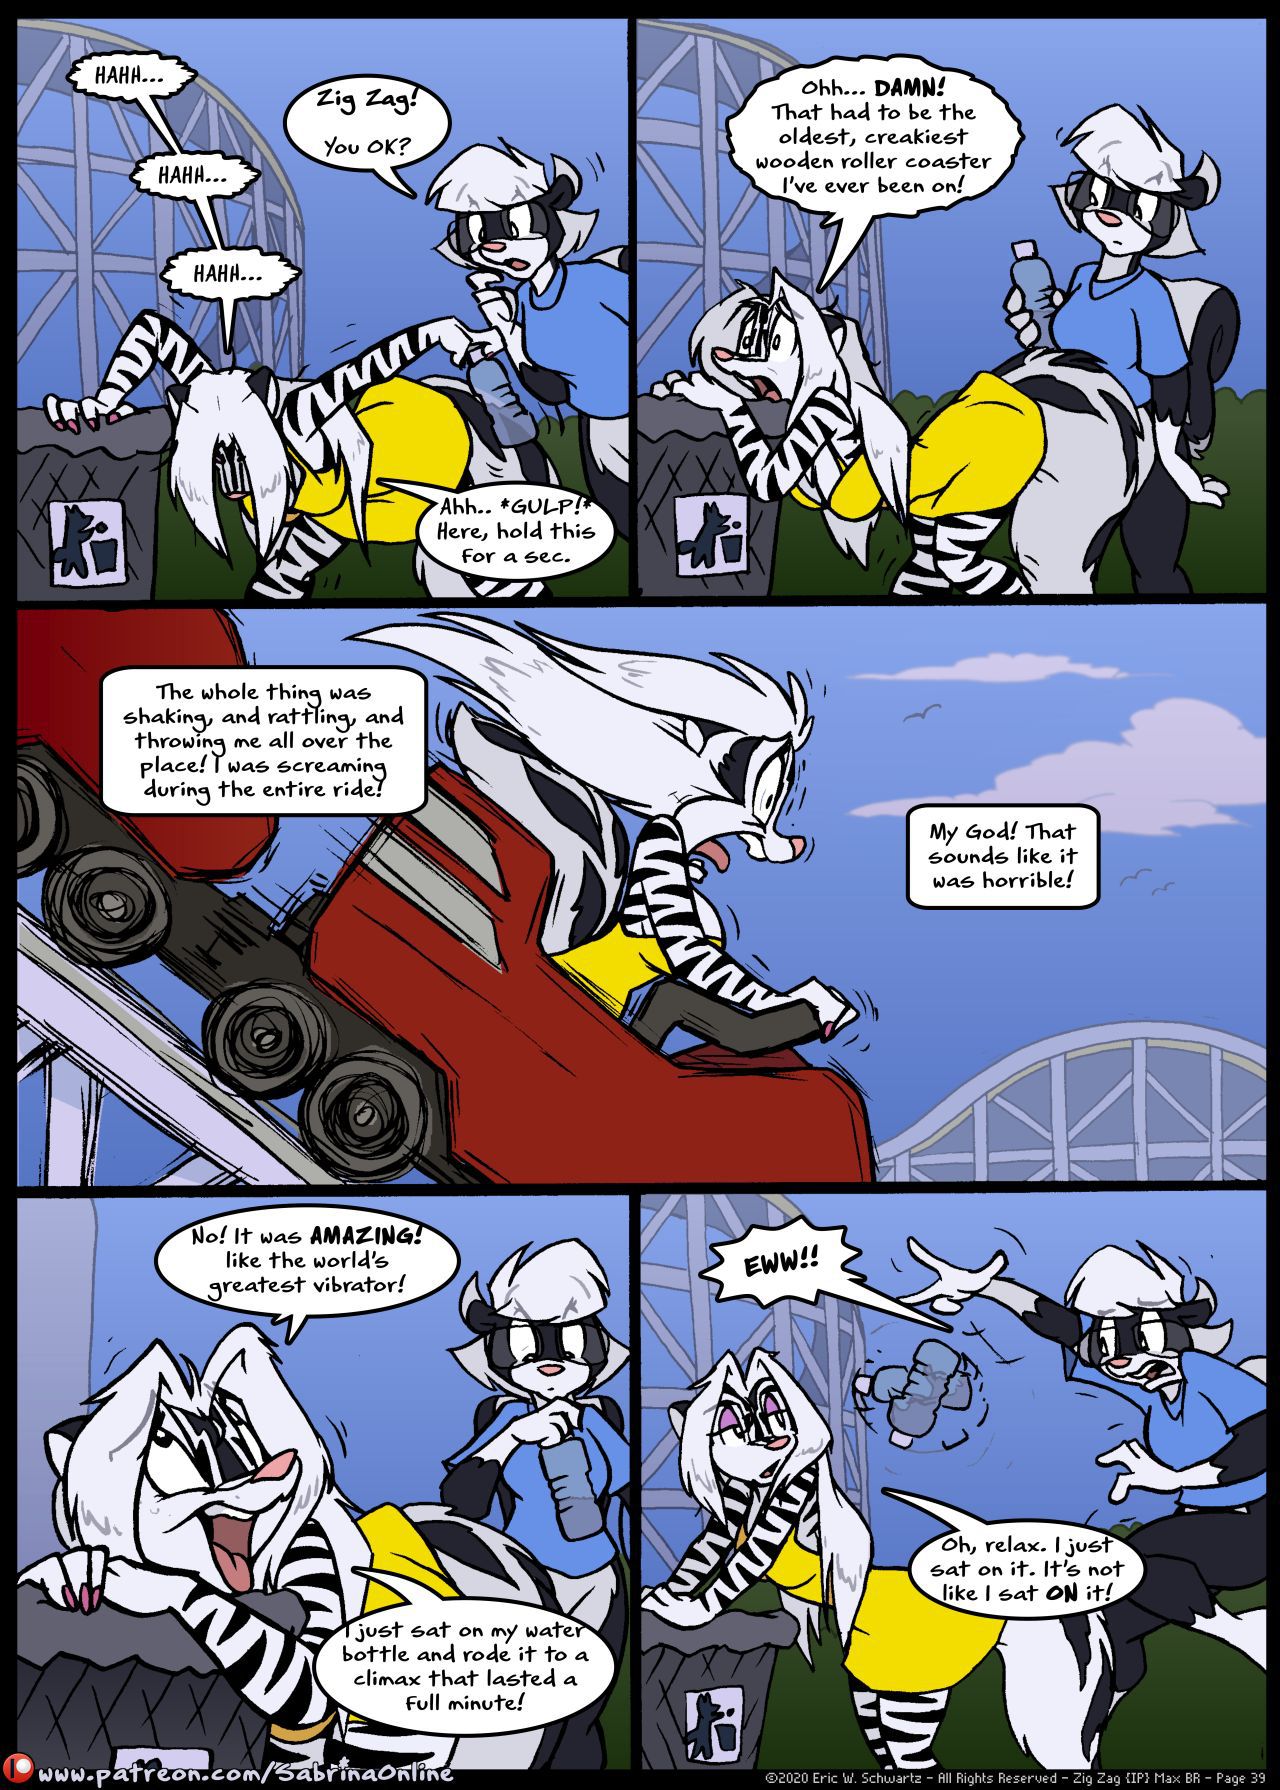 [Eric W. Schwartz] Sabrina Online: Skunks' Day Out (Ongoing) 39